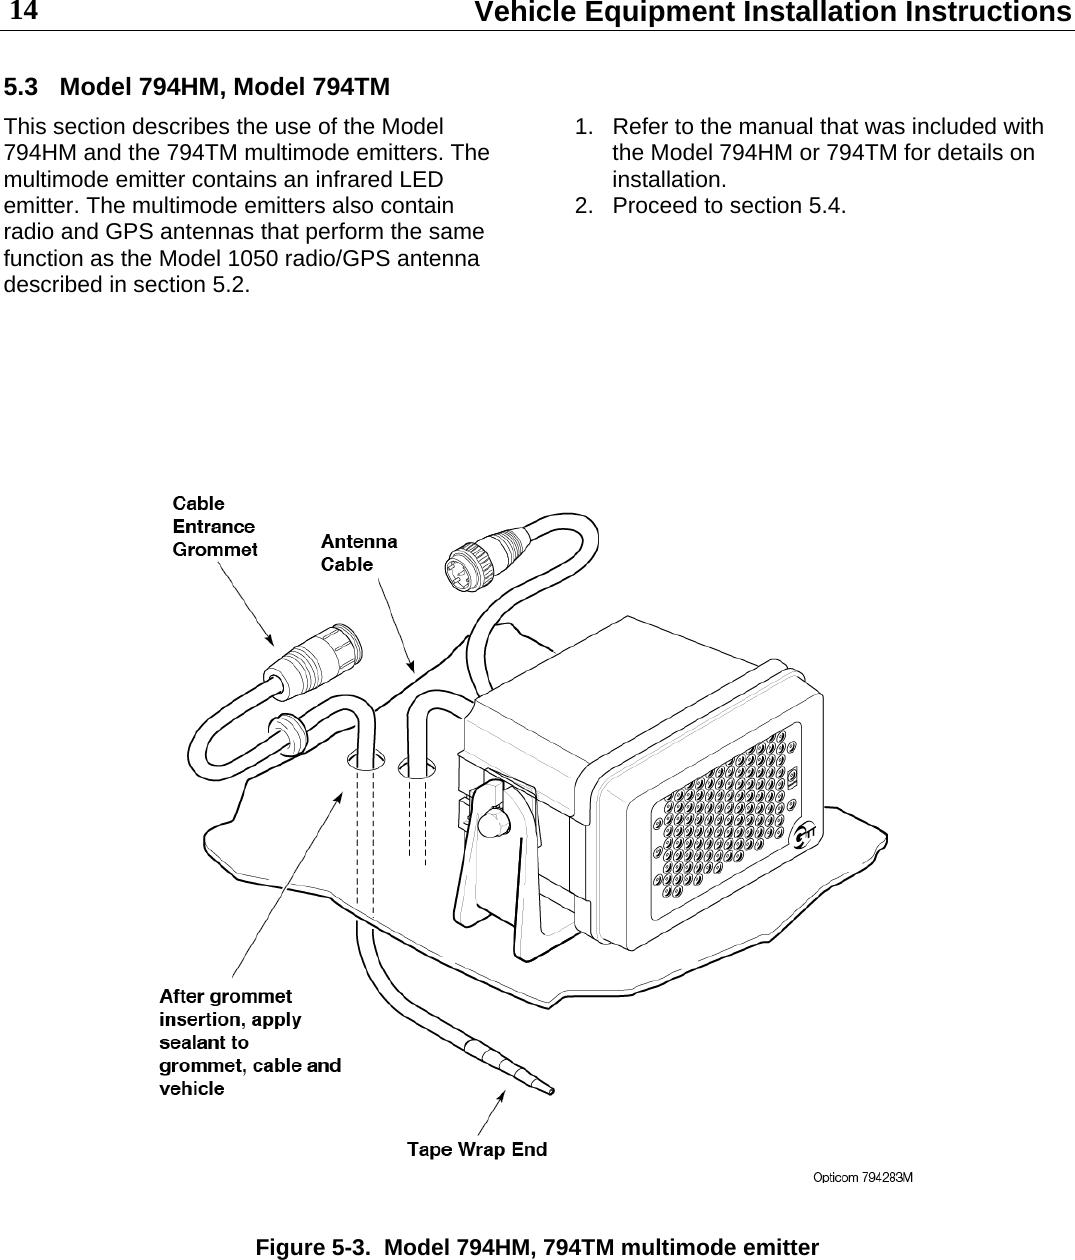  Vehicle Equipment Installation Instructions 14 5.3  Model 794HM, Model 794TM This section describes the use of the Model 794HM and the 794TM multimode emitters. The multimode emitter contains an infrared LED emitter. The multimode emitters also contain radio and GPS antennas that perform the same function as the Model 1050 radio/GPS antenna described in section 5.2. 1.  Refer to the manual that was included with the Model 794HM or 794TM for details on installation. 2.  Proceed to section 5.4.          Figure 5-3.  Model 794HM, 794TM multimode emitter      